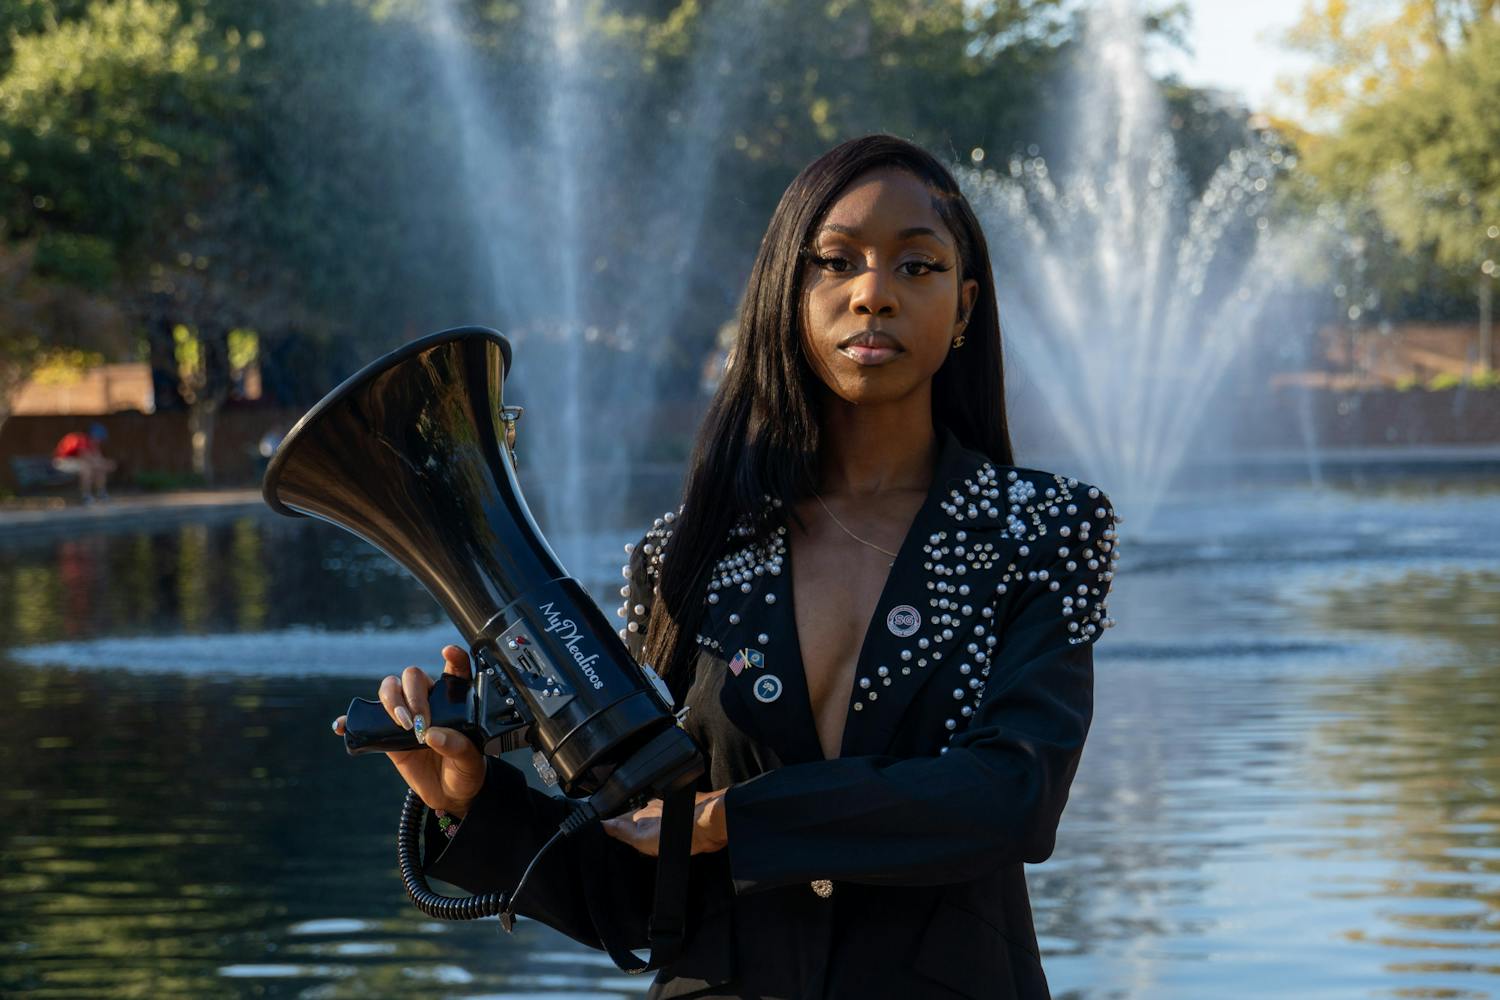 Fourth-year broadcast journalism student Courtney McClain poses with her megaphone outside the Thomas Cooper 鶹С򽴫ý on Oct. 24, 2022. The junior lobbyist participates and organizes marches and events to combat the mistreatment of minorities, LGBTQIA+ groups and other groups that face discrimination.